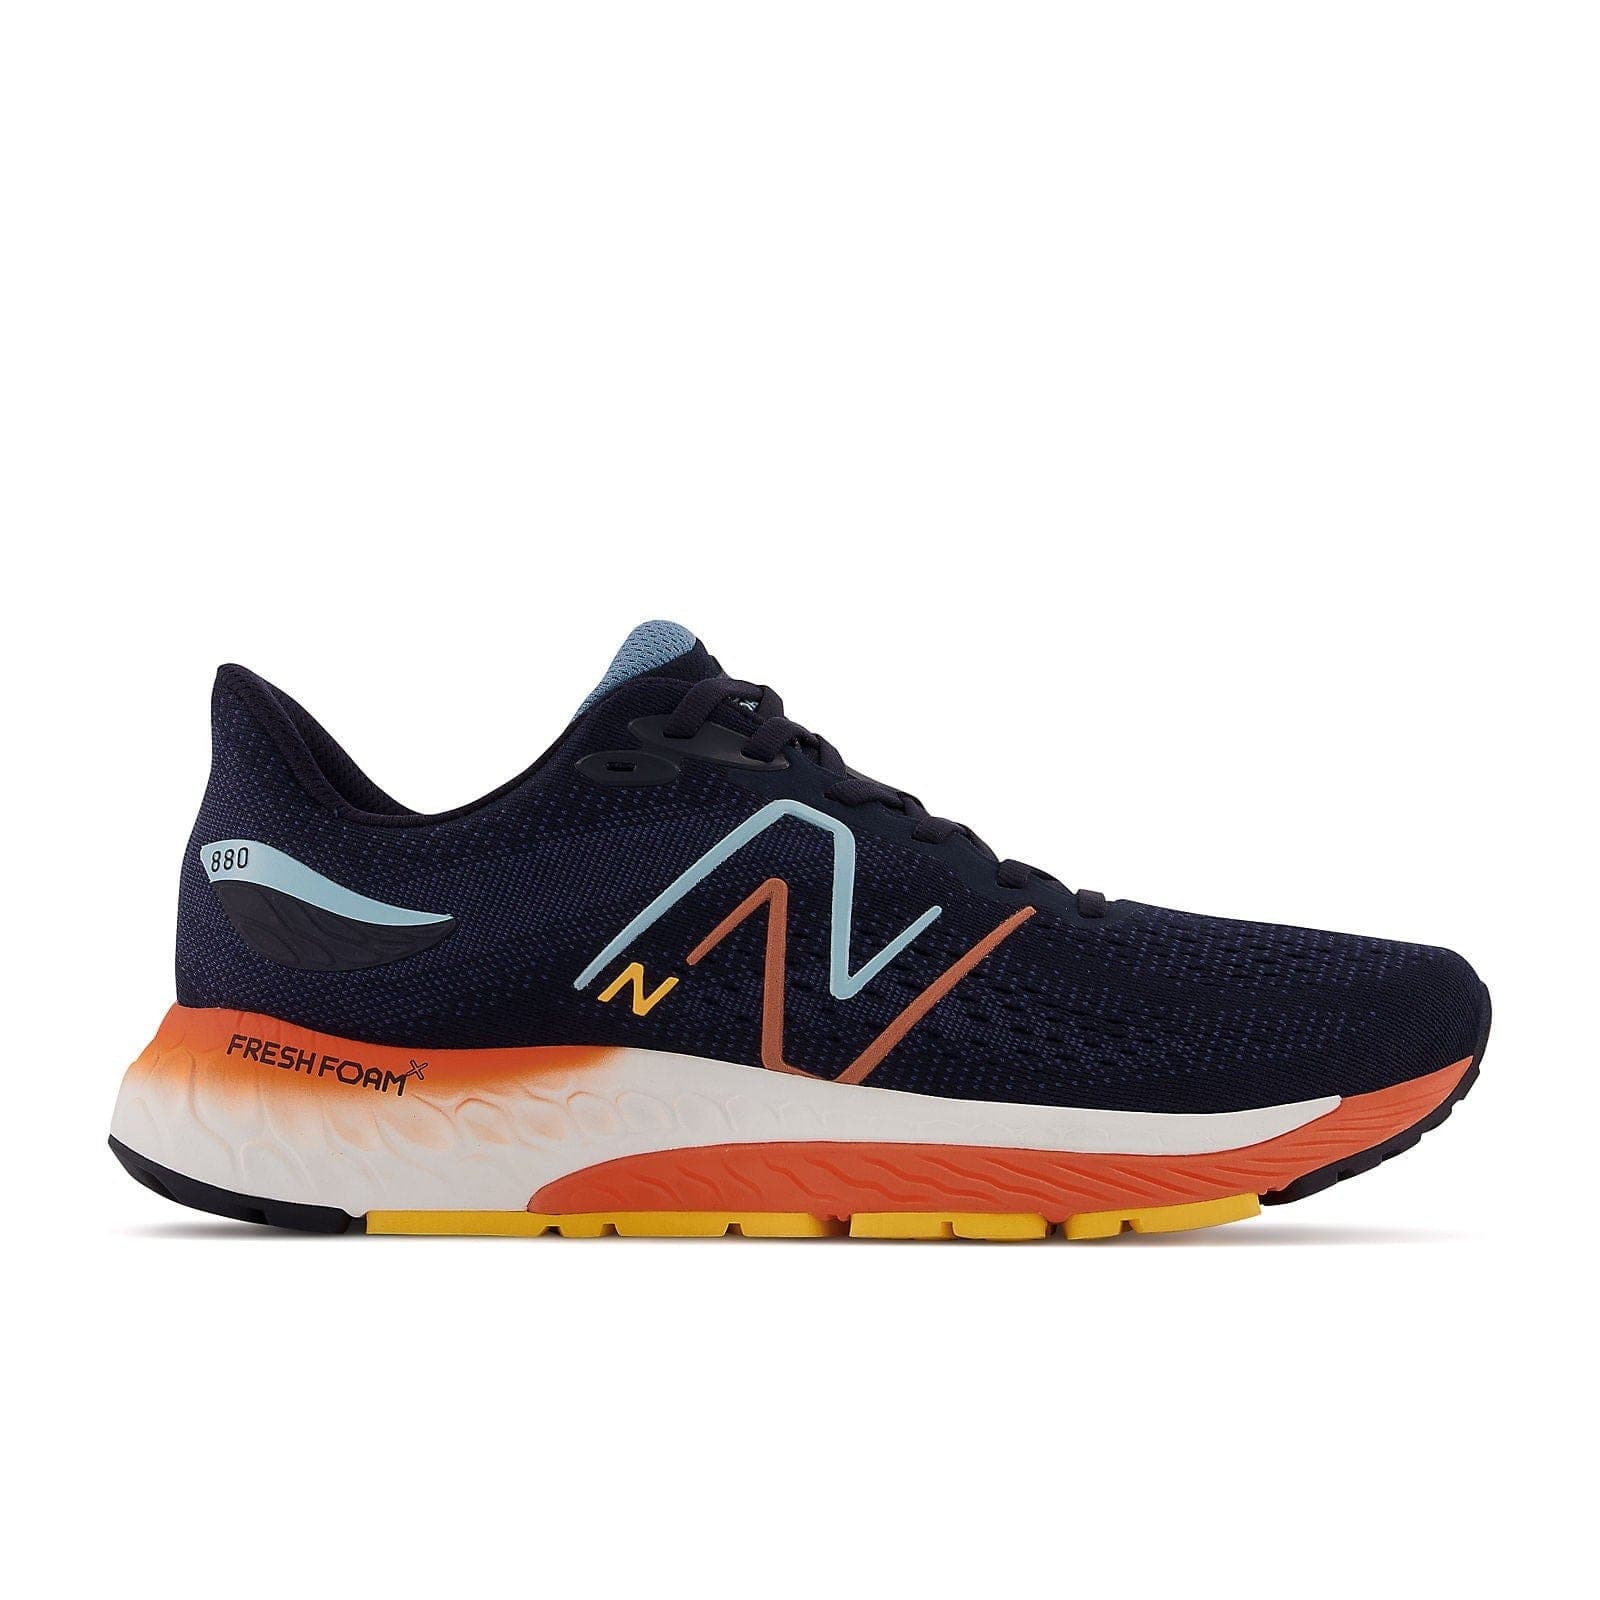 New Balance Fresh Foam 880v12 (Men's) - Eclipse with vibrant apricot and bleach blue